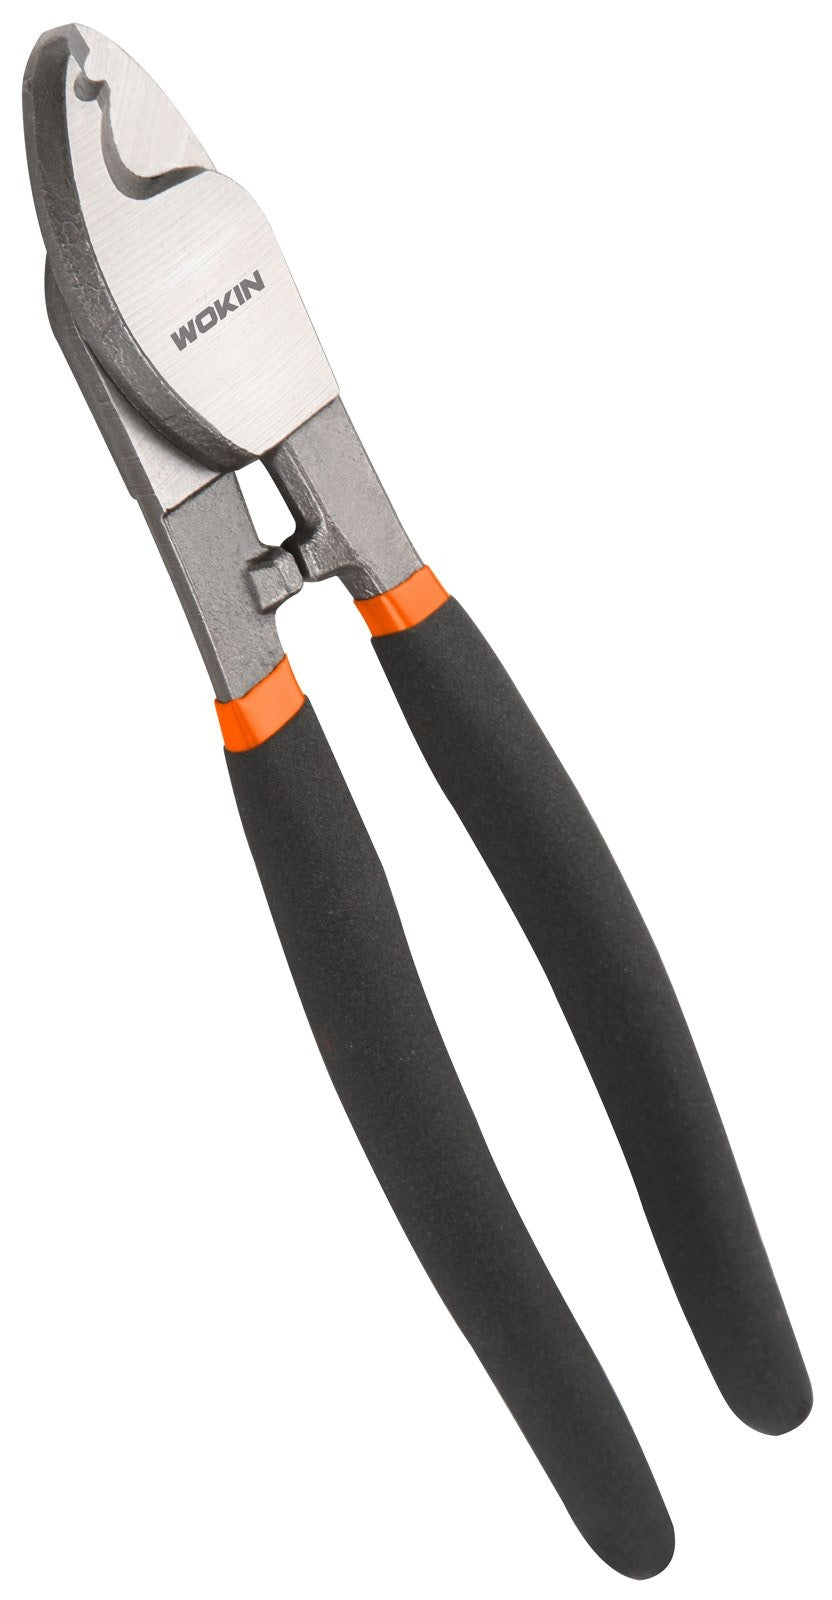 Wokin 8 Inch Cable Cutter